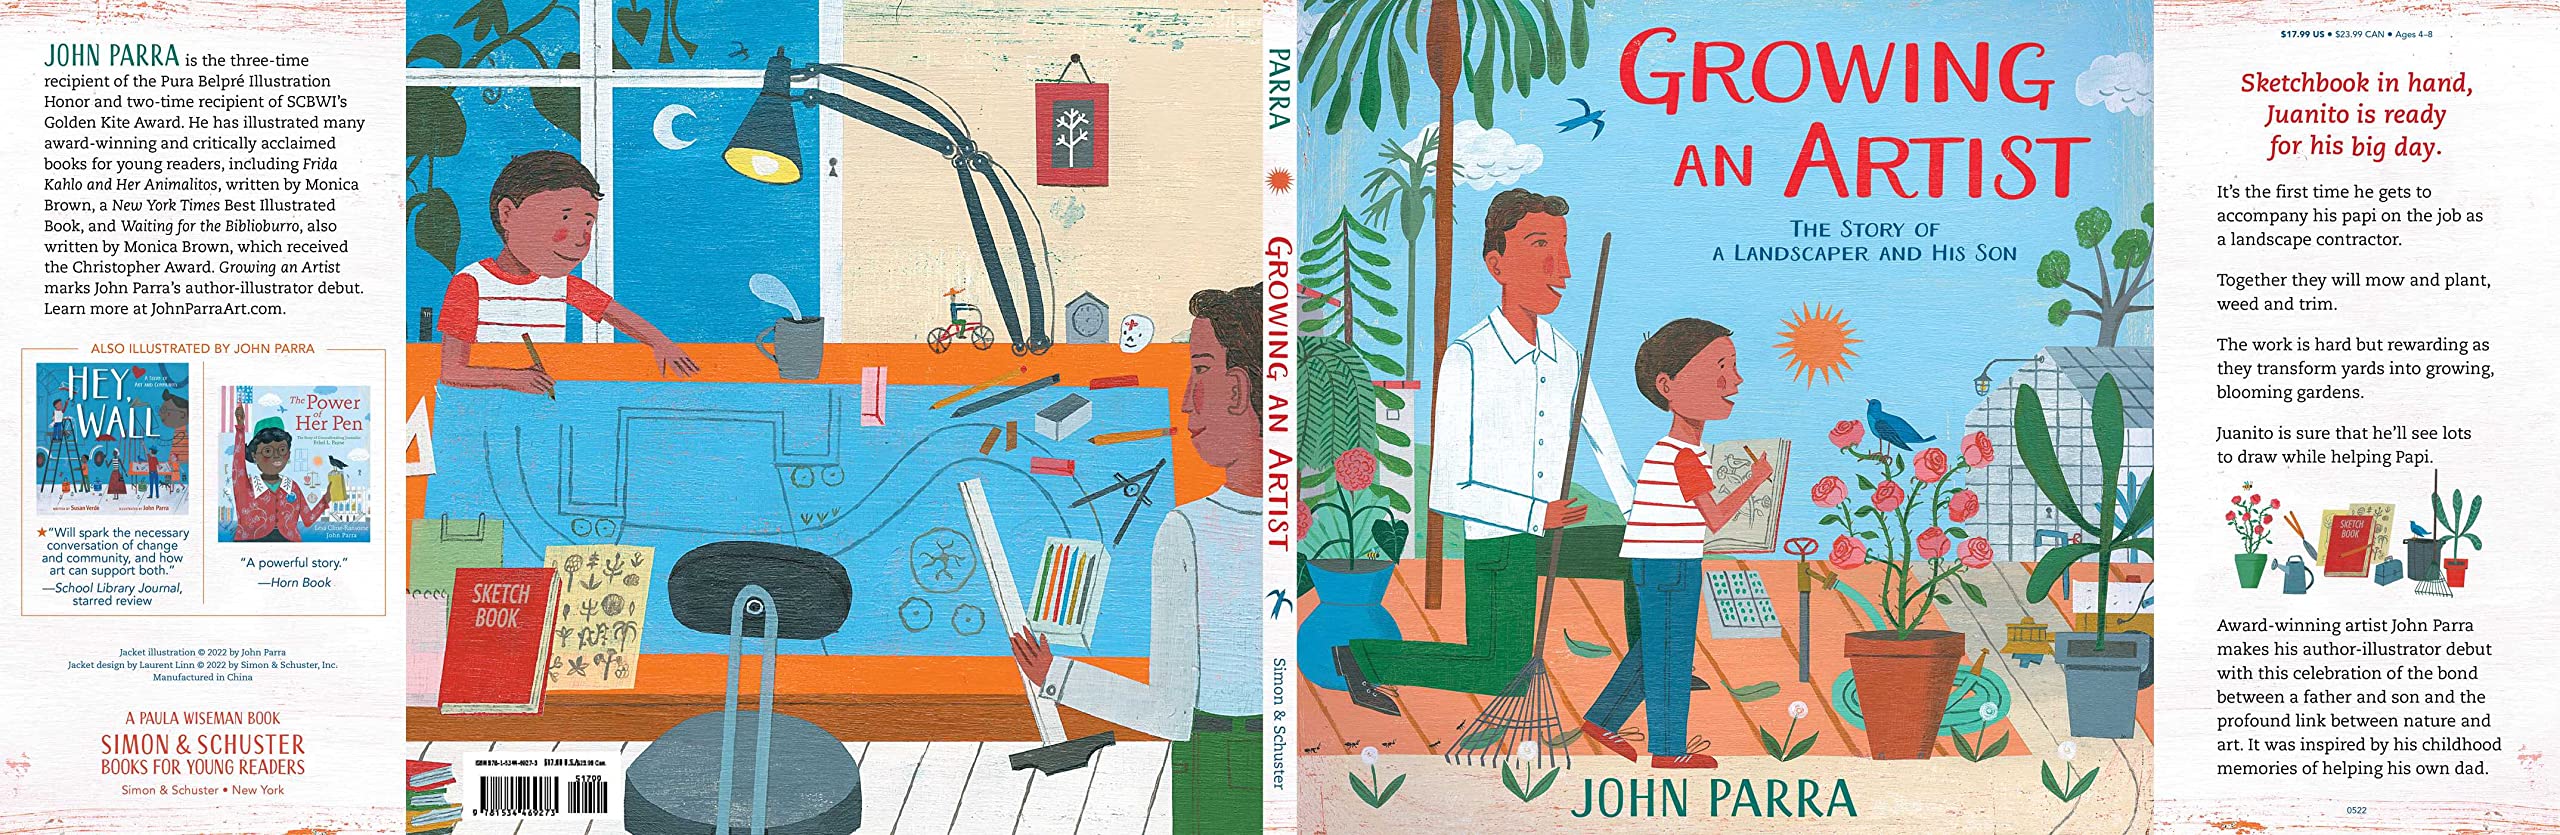 Growing an Artist: The Story of a Landscaper and His Son Hardcover